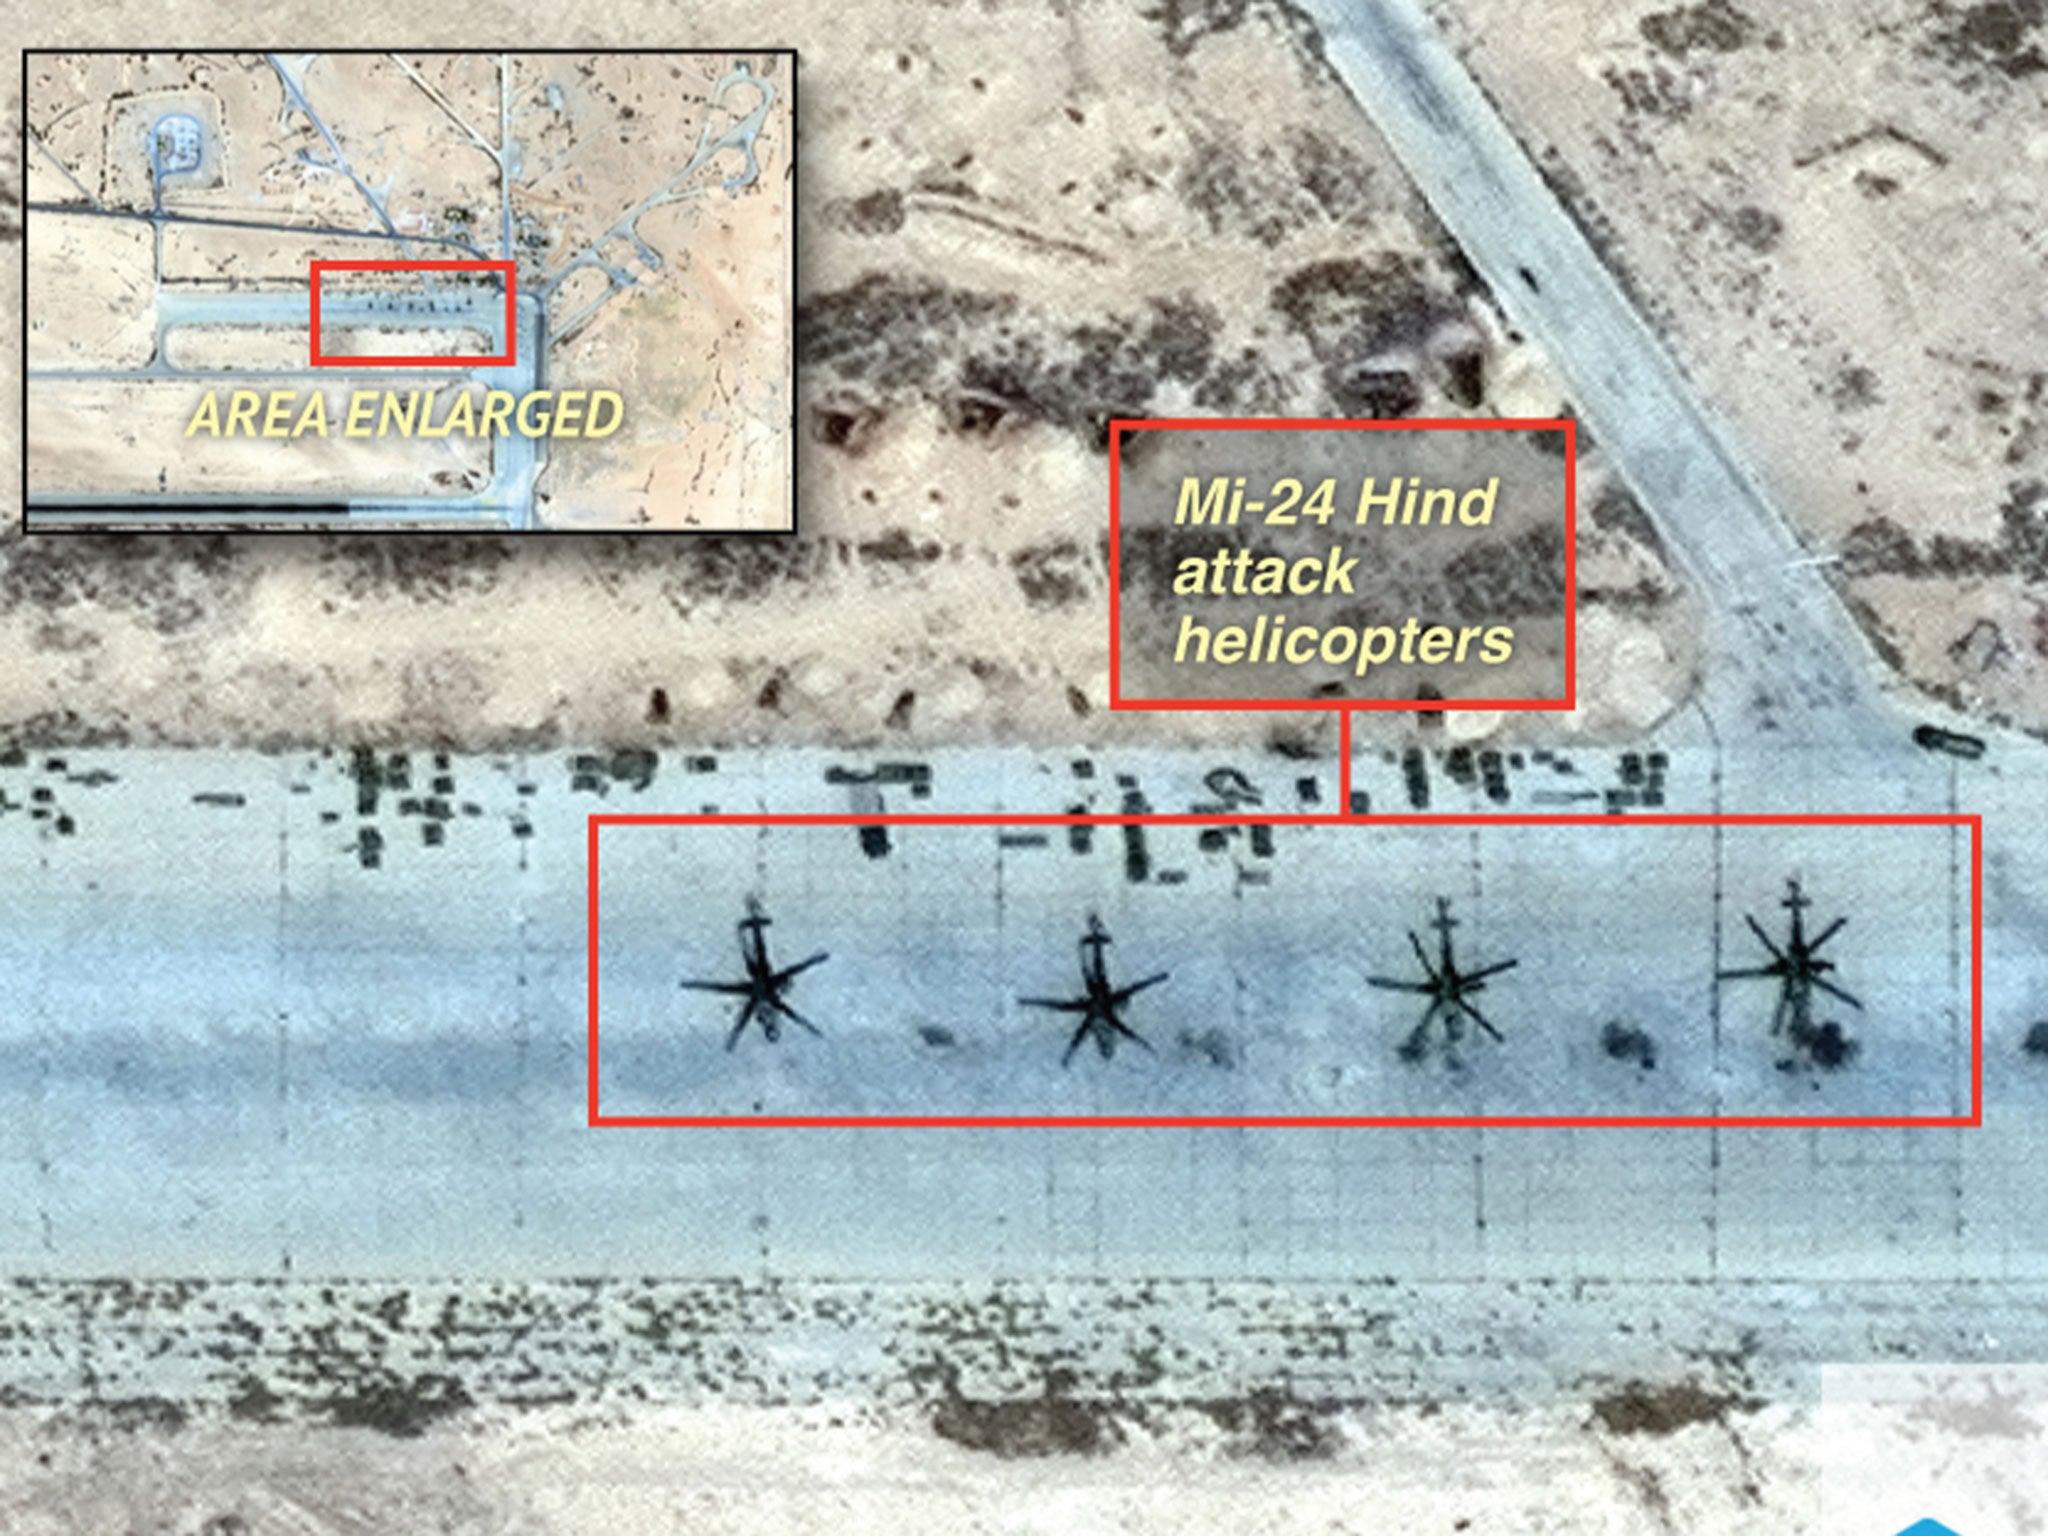 Satellite images taken on 14 May and acquired by Stratfor show the four Russian Mi-24 Hind attack helicopters before they were destroyed